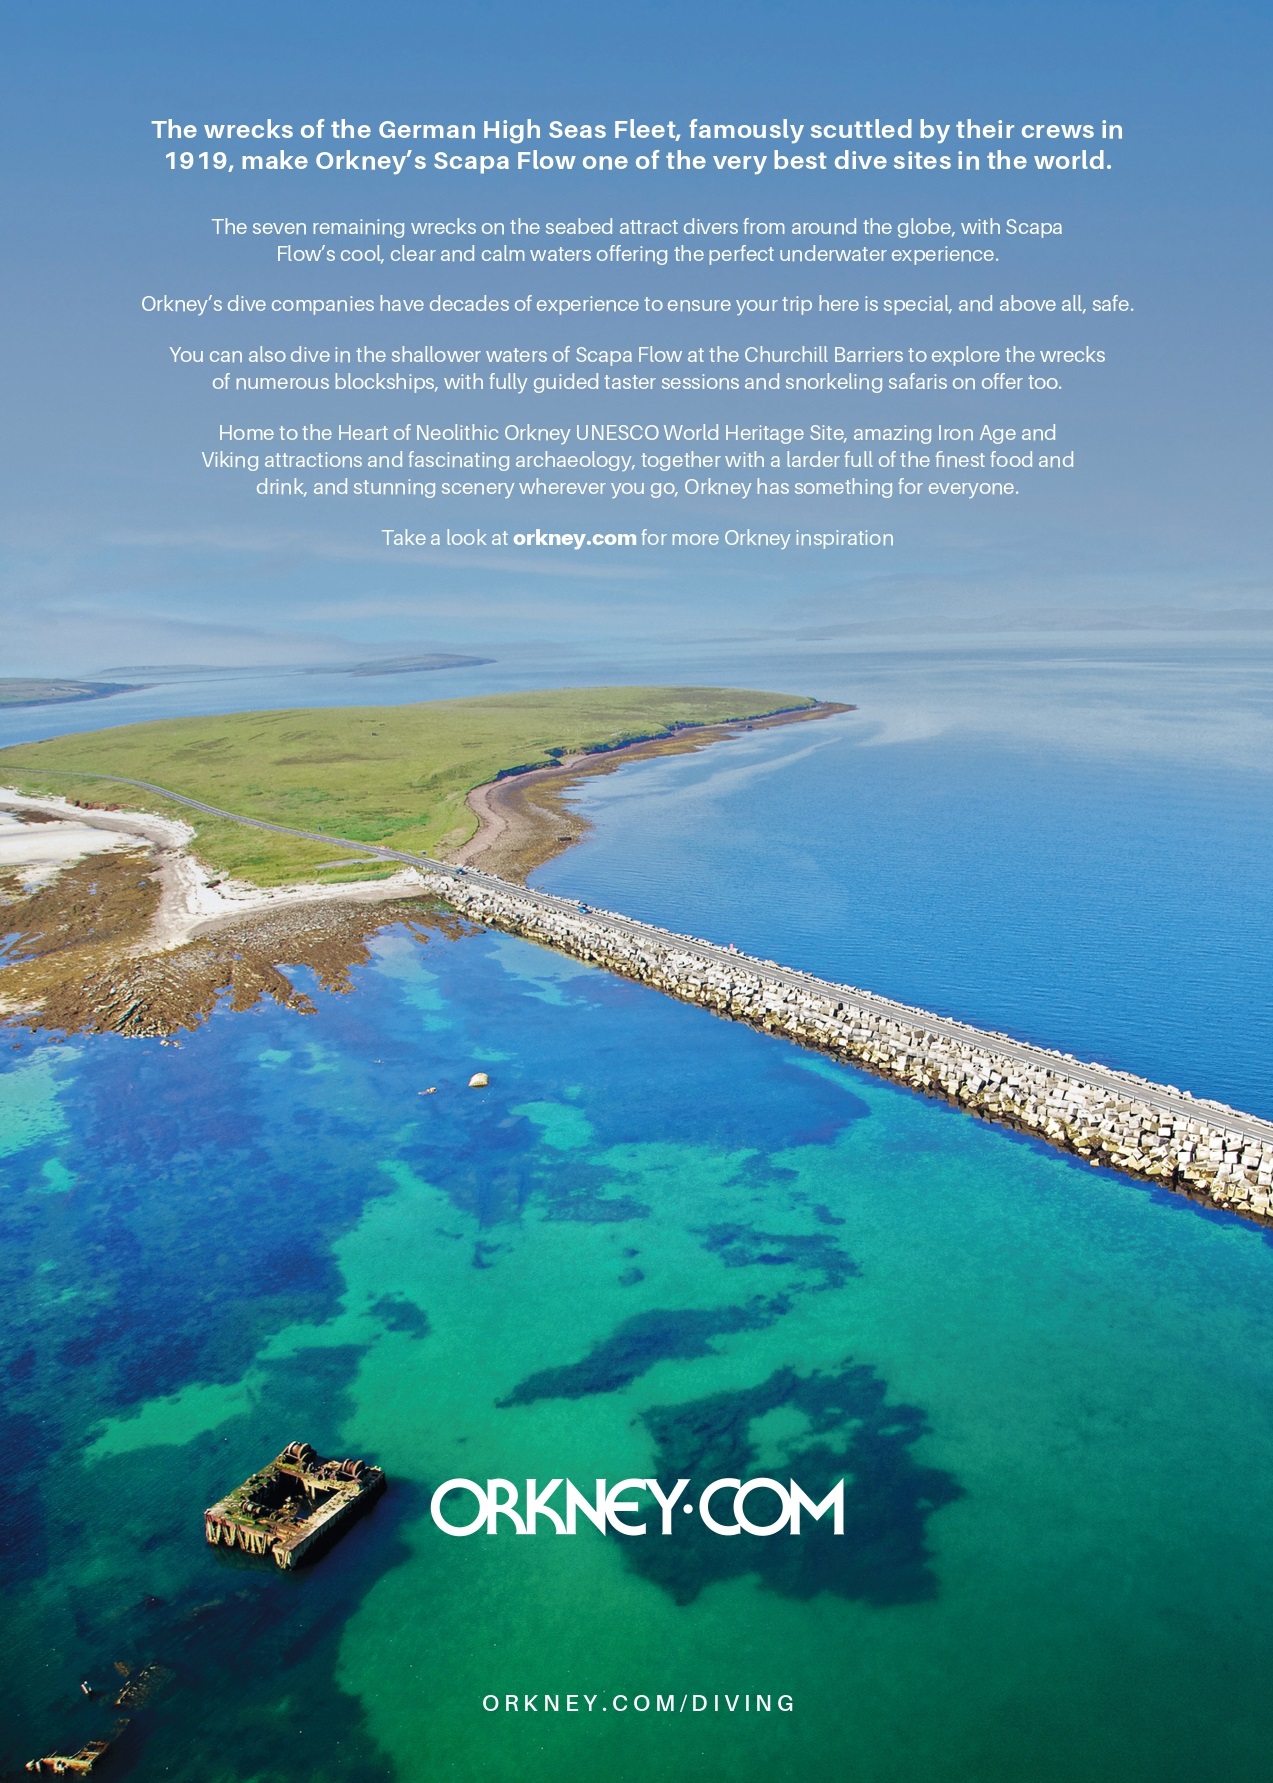 Orkney ad